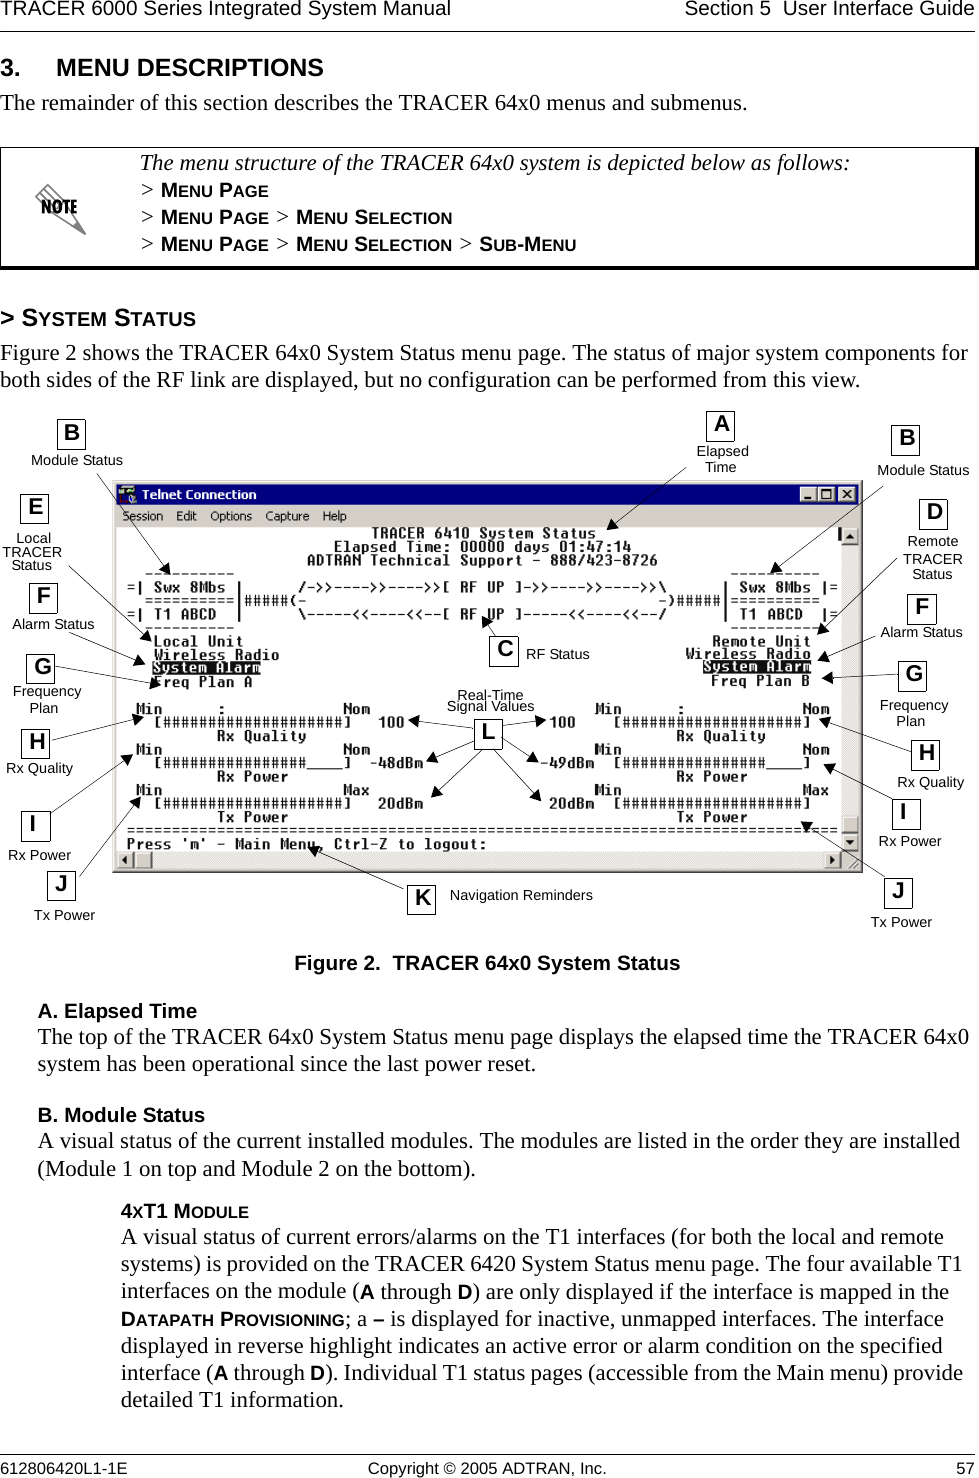 TRACER 6000 Series Integrated System Manual Section 5  User Interface Guide612806420L1-1E Copyright © 2005 ADTRAN, Inc. 573. MENU DESCRIPTIONSThe remainder of this section describes the TRACER 64x0 menus and submenus. &gt; SYSTEM STATUSFigure 2 shows the TRACER 64x0 System Status menu page. The status of major system components for both sides of the RF link are displayed, but no configuration can be performed from this view.Figure 2.  TRACER 64x0 System StatusA. Elapsed TimeThe top of the TRACER 64x0 System Status menu page displays the elapsed time the TRACER 64x0 system has been operational since the last power reset.B. Module StatusA visual status of the current installed modules. The modules are listed in the order they are installed (Module 1 on top and Module 2 on the bottom).The menu structure of the TRACER 64x0 system is depicted below as follows: &gt; MENU PAGE &gt; MENU PAGE &gt; MENU SELECTION &gt; MENU PAGE &gt; MENU SELECTION &gt; SUB-MENU4XT1 MODULE A visual status of current errors/alarms on the T1 interfaces (for both the local and remote systems) is provided on the TRACER 6420 System Status menu page. The four available T1 interfaces on the module (A through D) are only displayed if the interface is mapped in the DATAPATH PROVISIONING; a – is displayed for inactive, unmapped interfaces. The interface displayed in reverse highlight indicates an active error or alarm condition on the specified interface (A through D). Individual T1 status pages (accessible from the Main menu) provide detailed T1 information.AElapsedTimeEGCRF StatusDRemoteGIRx PowerJTx PowerJTx Power KNavigation RemindersTRACERPlan FrequencyPlanStatusHModule StatusBLocalFrequencyIRx PowerModule StatusStatus TRACERRx QualityRx QualityBLReal-TimeSignal ValuesFAlarm Status FAlarm StatusH